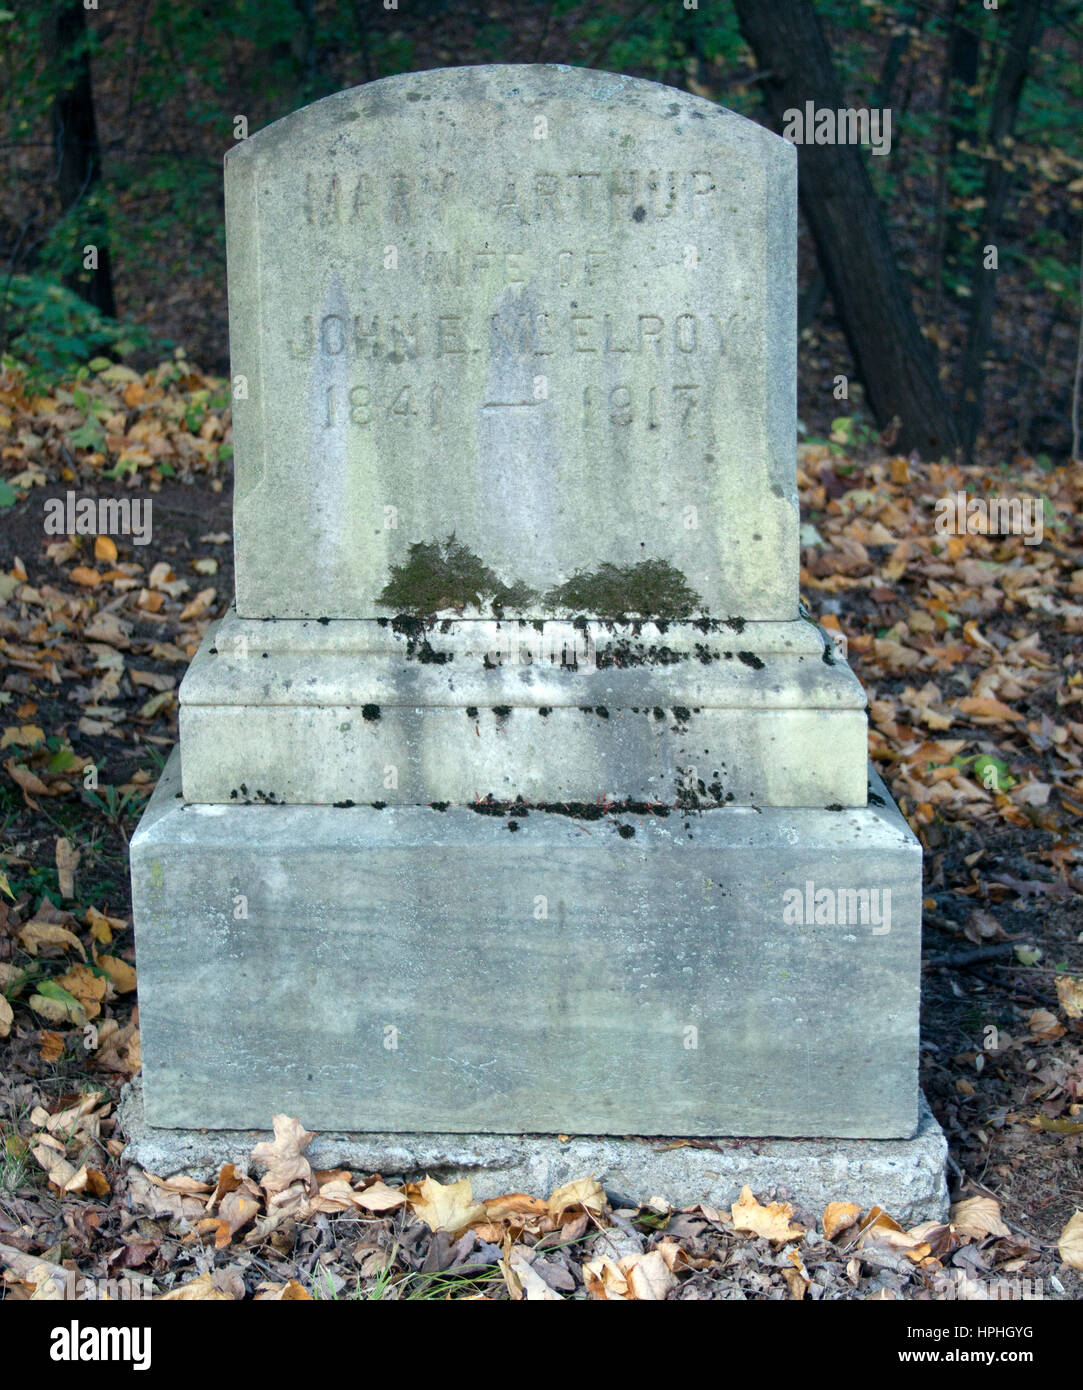 Mary Arthurs grave in Albany New York. She was the sister of President Arthur and served as First Lady when his wife died. Stock Photo